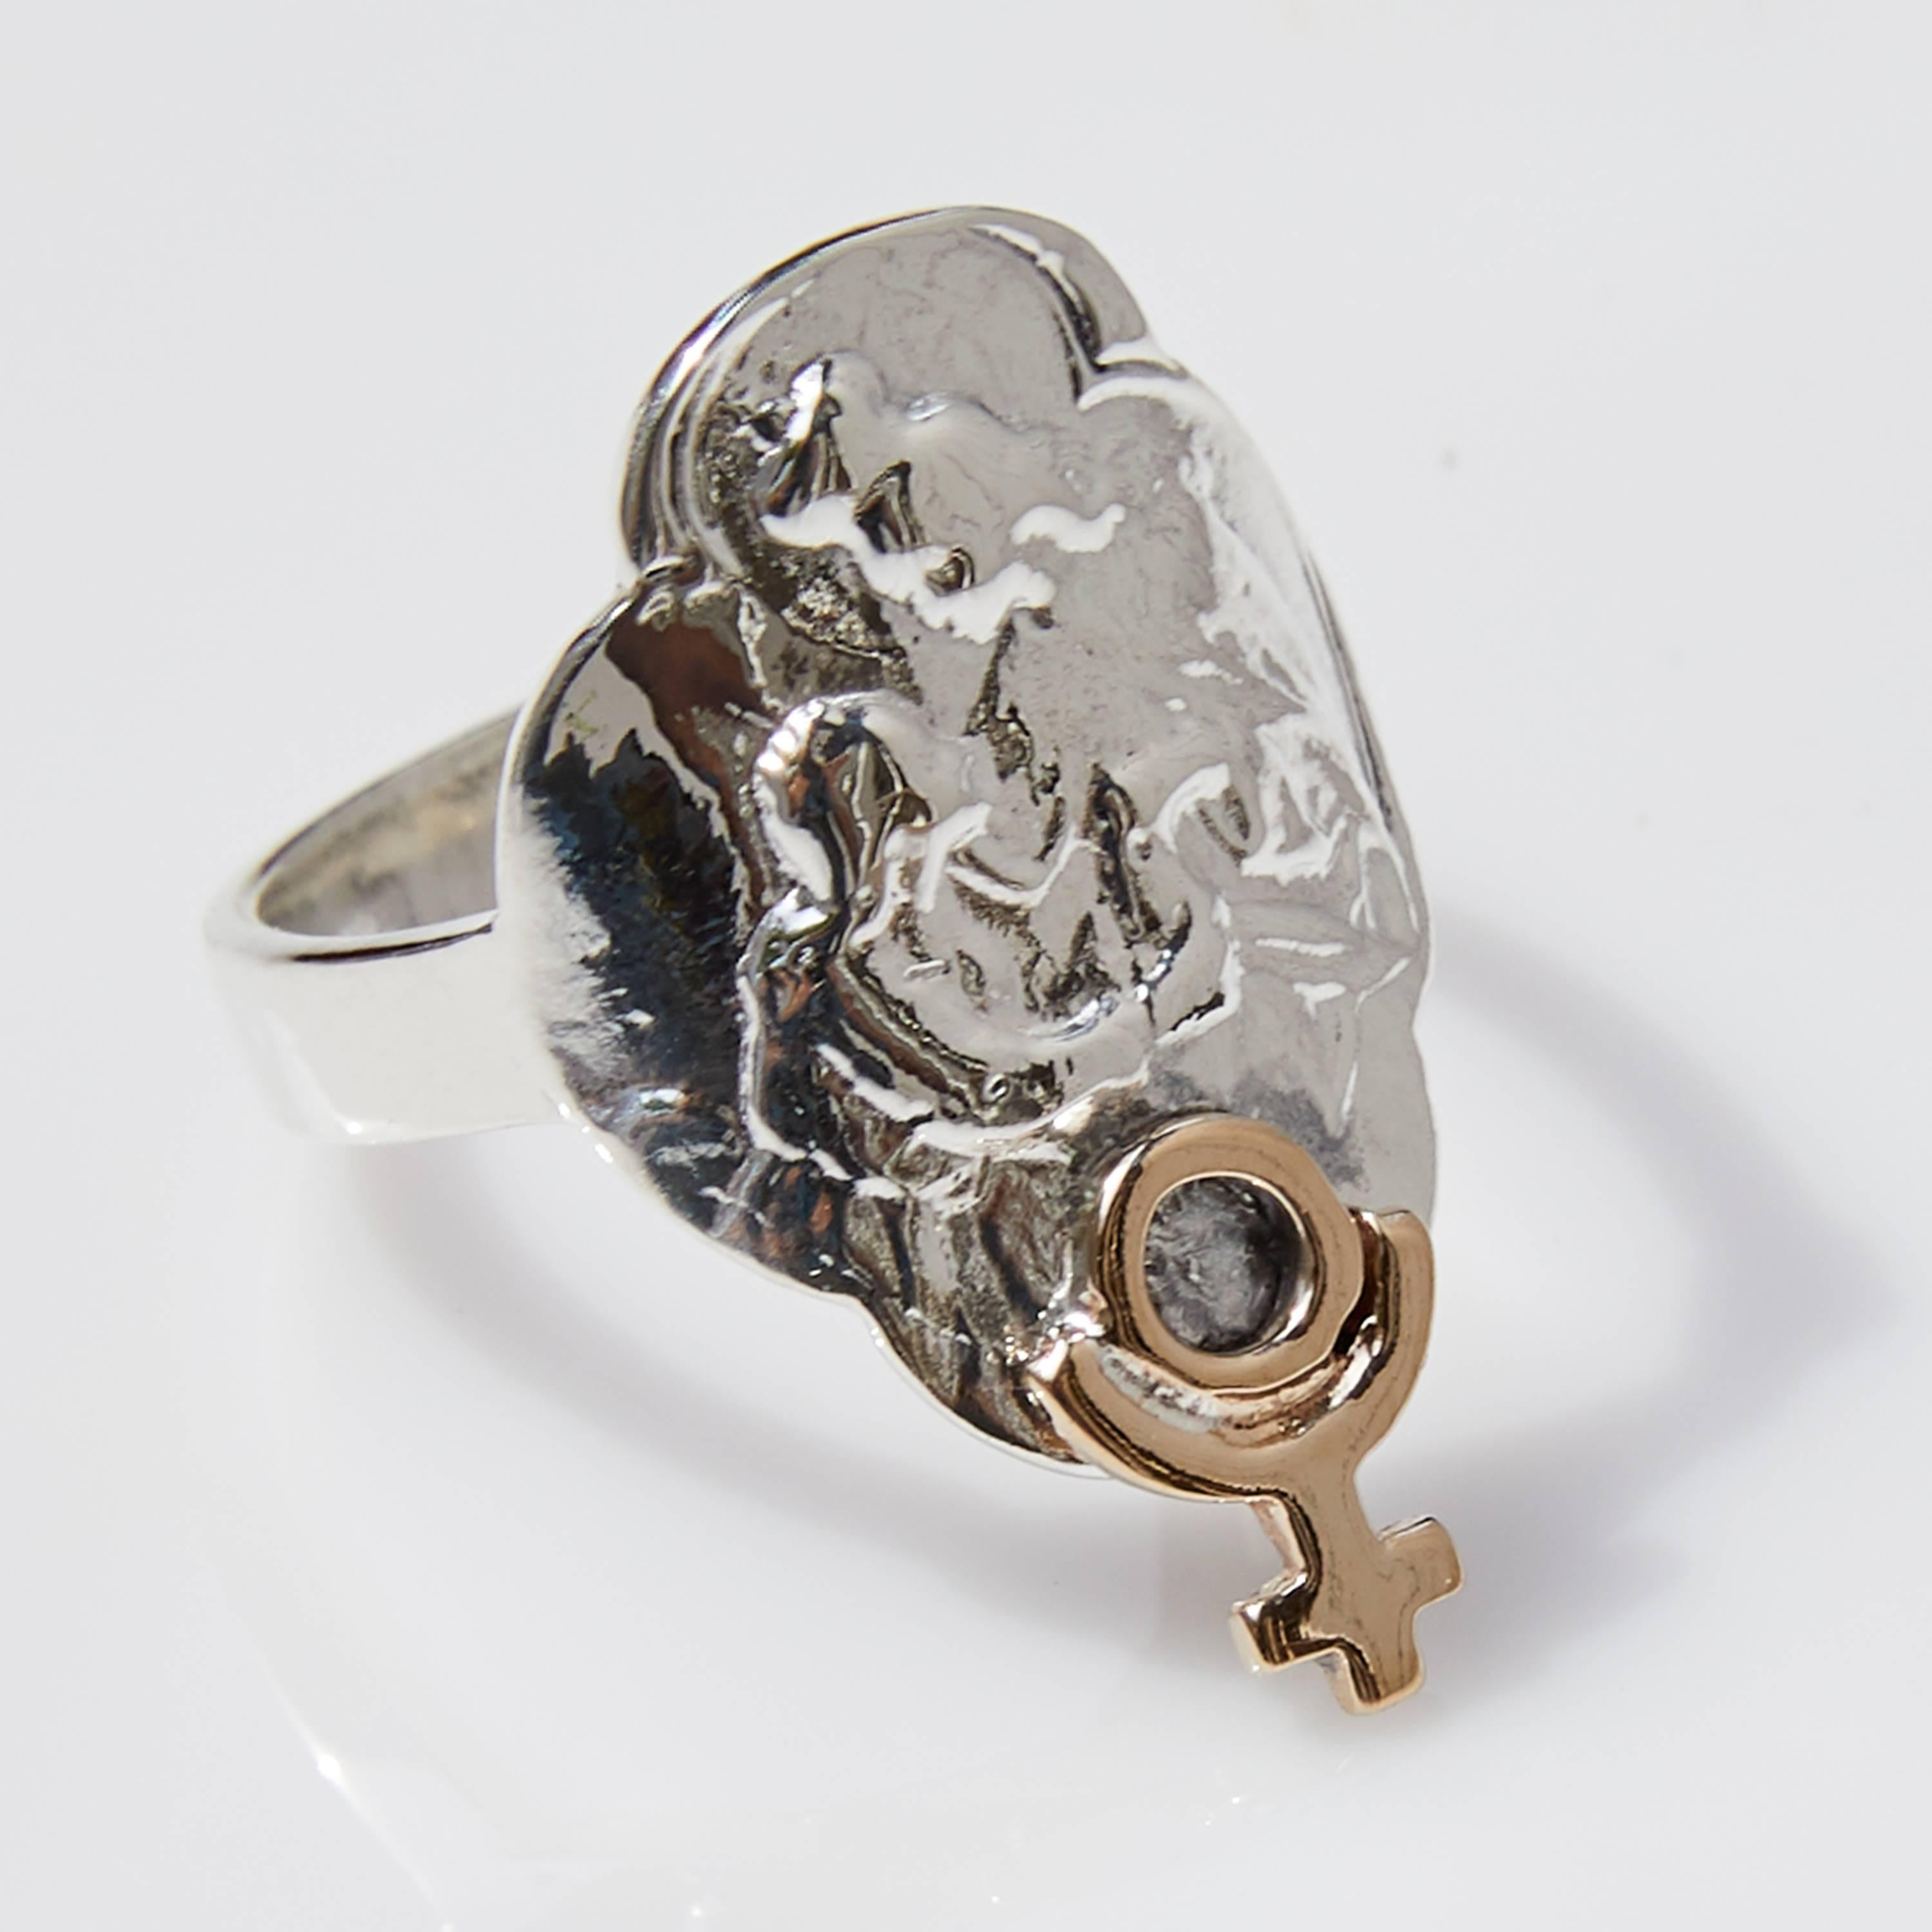 Virgin Mary Medal Ring Sterling Silver Bronze Crest Pluto Astrology J Dauphin

J DAUPHIN 